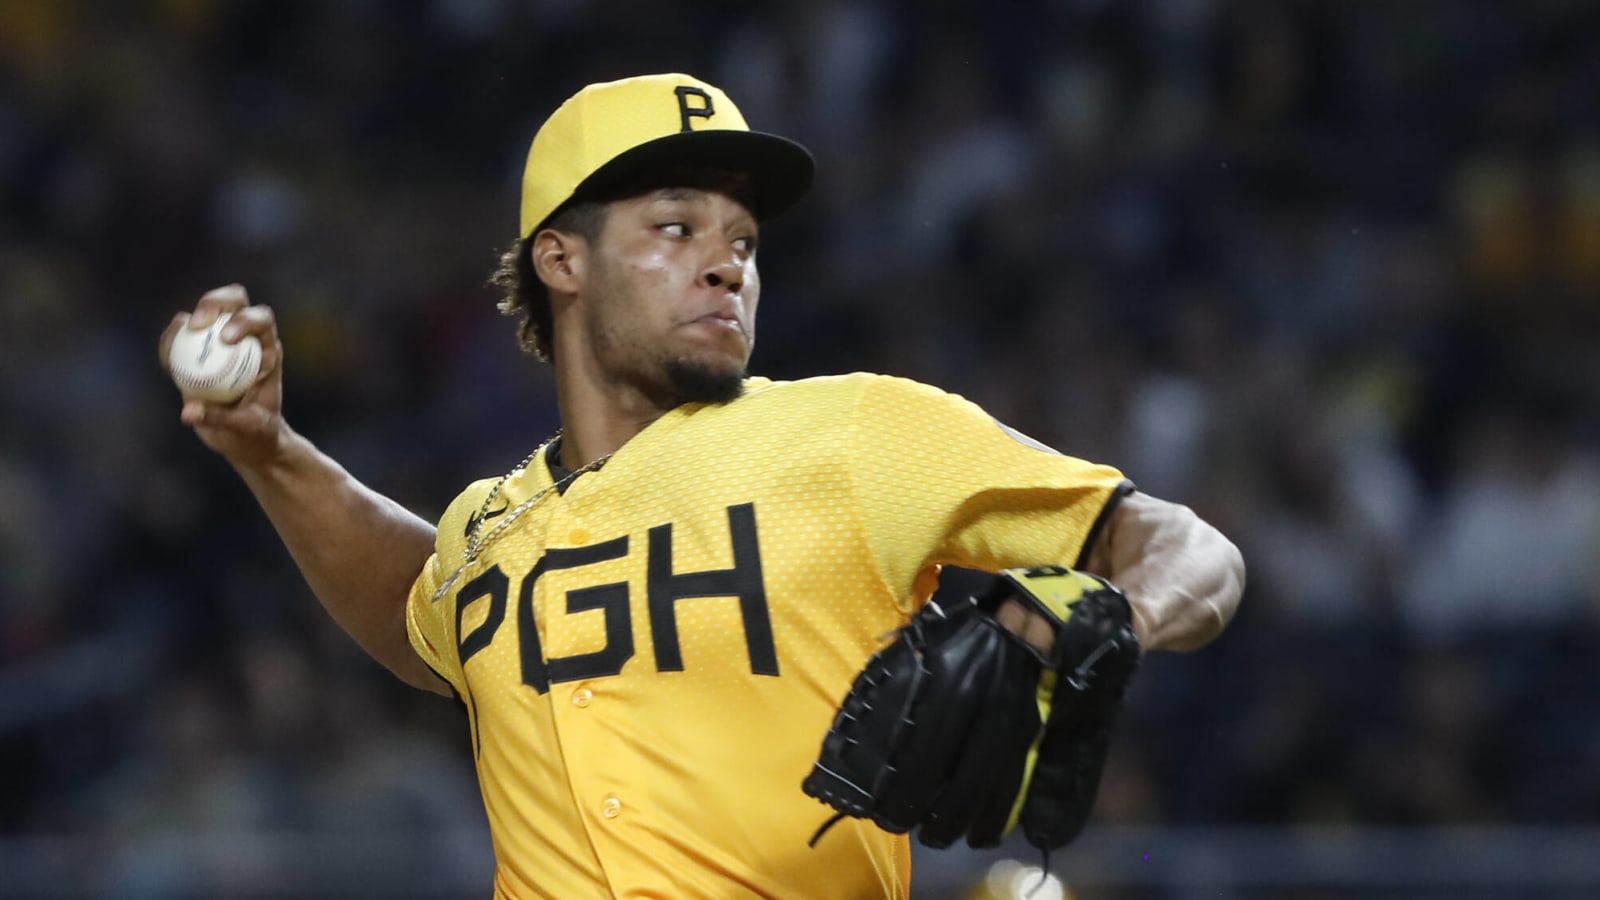 Pirates reliever undergoes UCL surgery